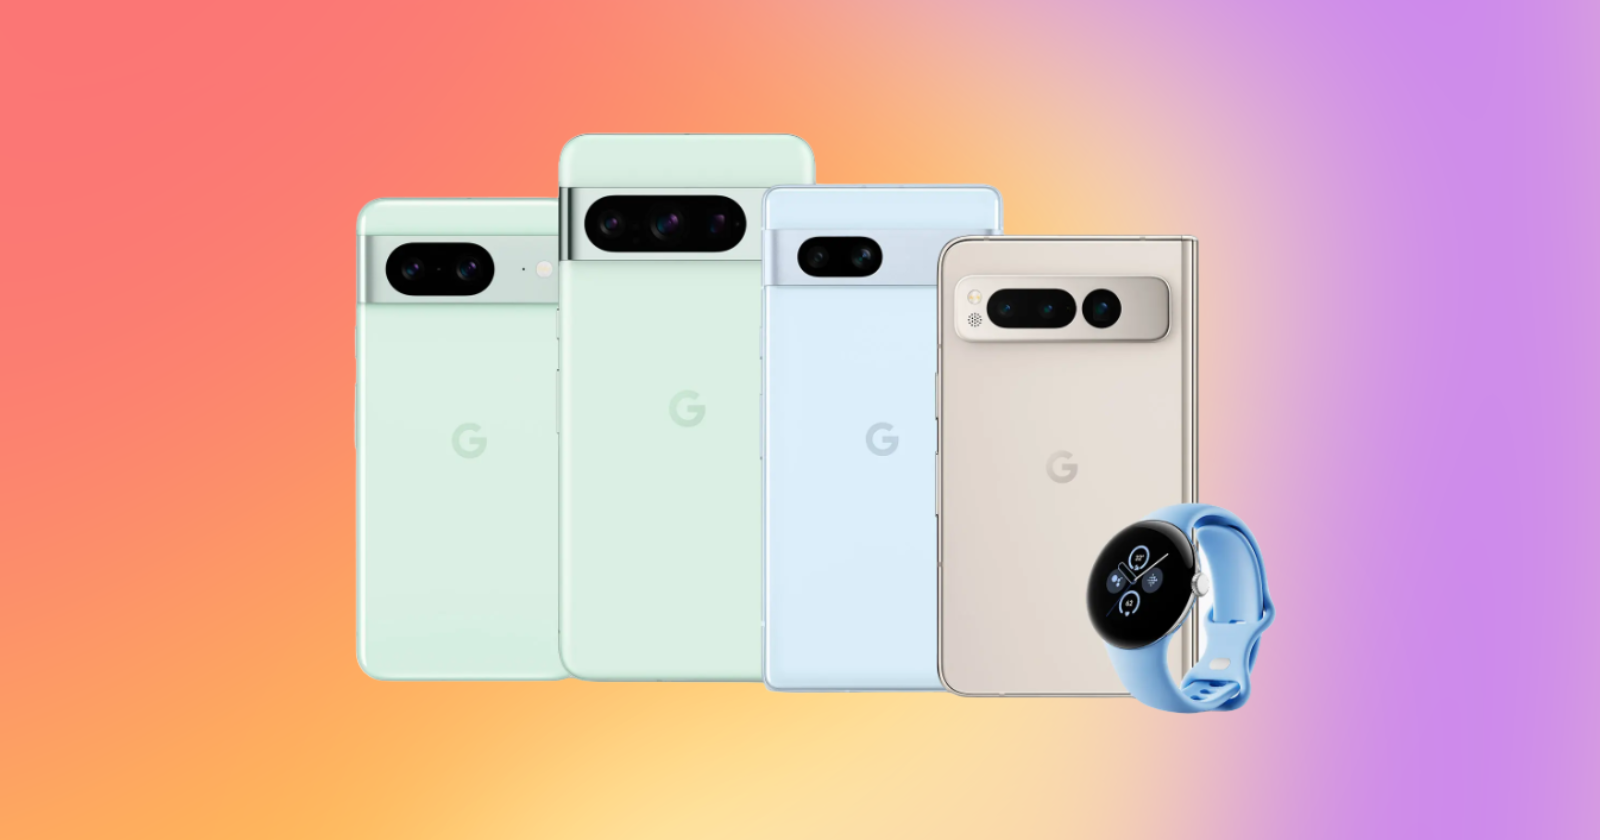 Save big on Pixel phones with Google's Football Sundays deals in the US